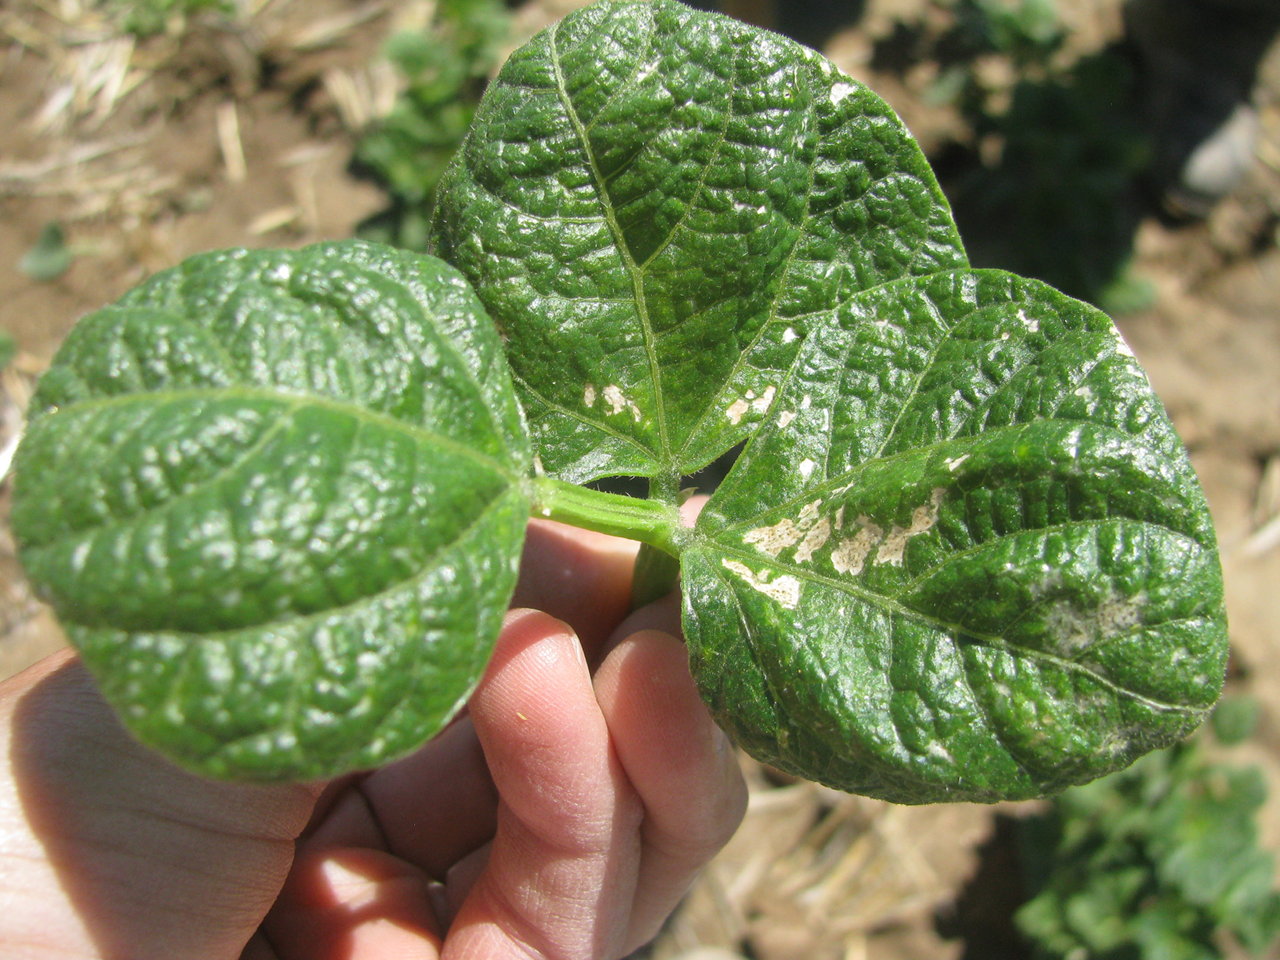 Silvering/stippling and browning of veins on the lower bean leaf surface as a result of severe thrips feeding injury